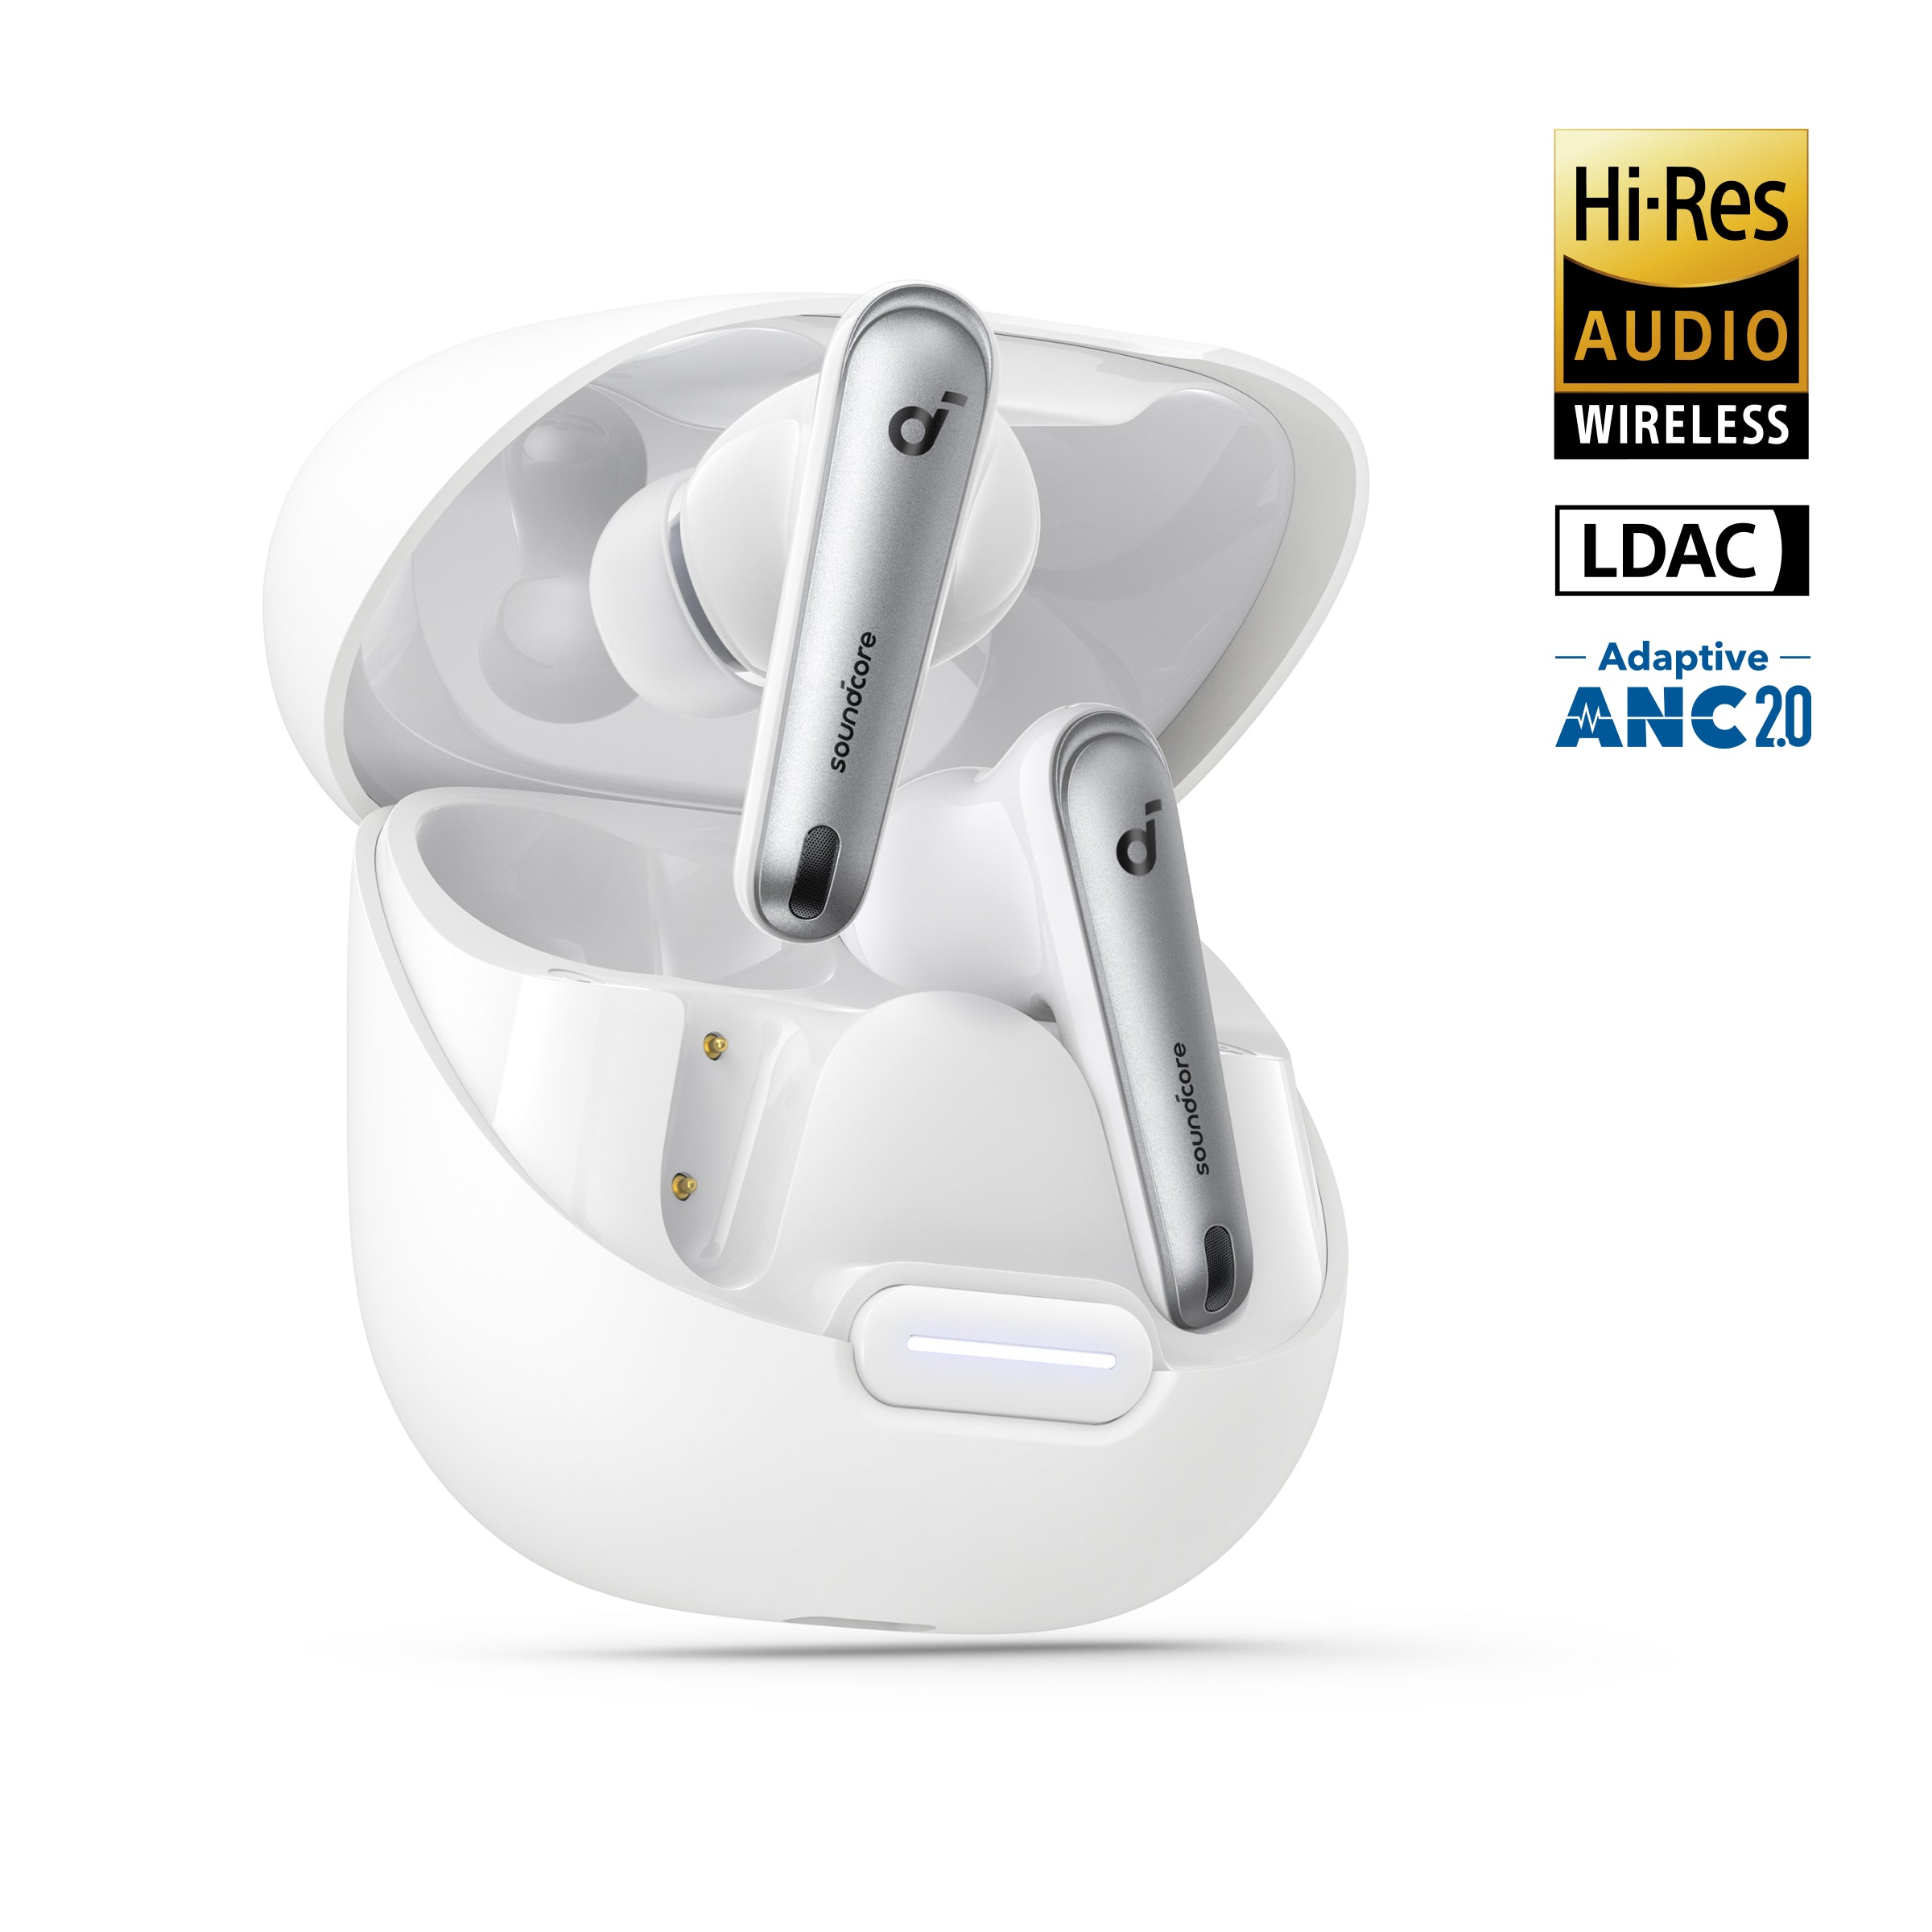 realme unveils Buds Air 5 Pro earphones with ANC, LDAC and 40 hours of use  for $60